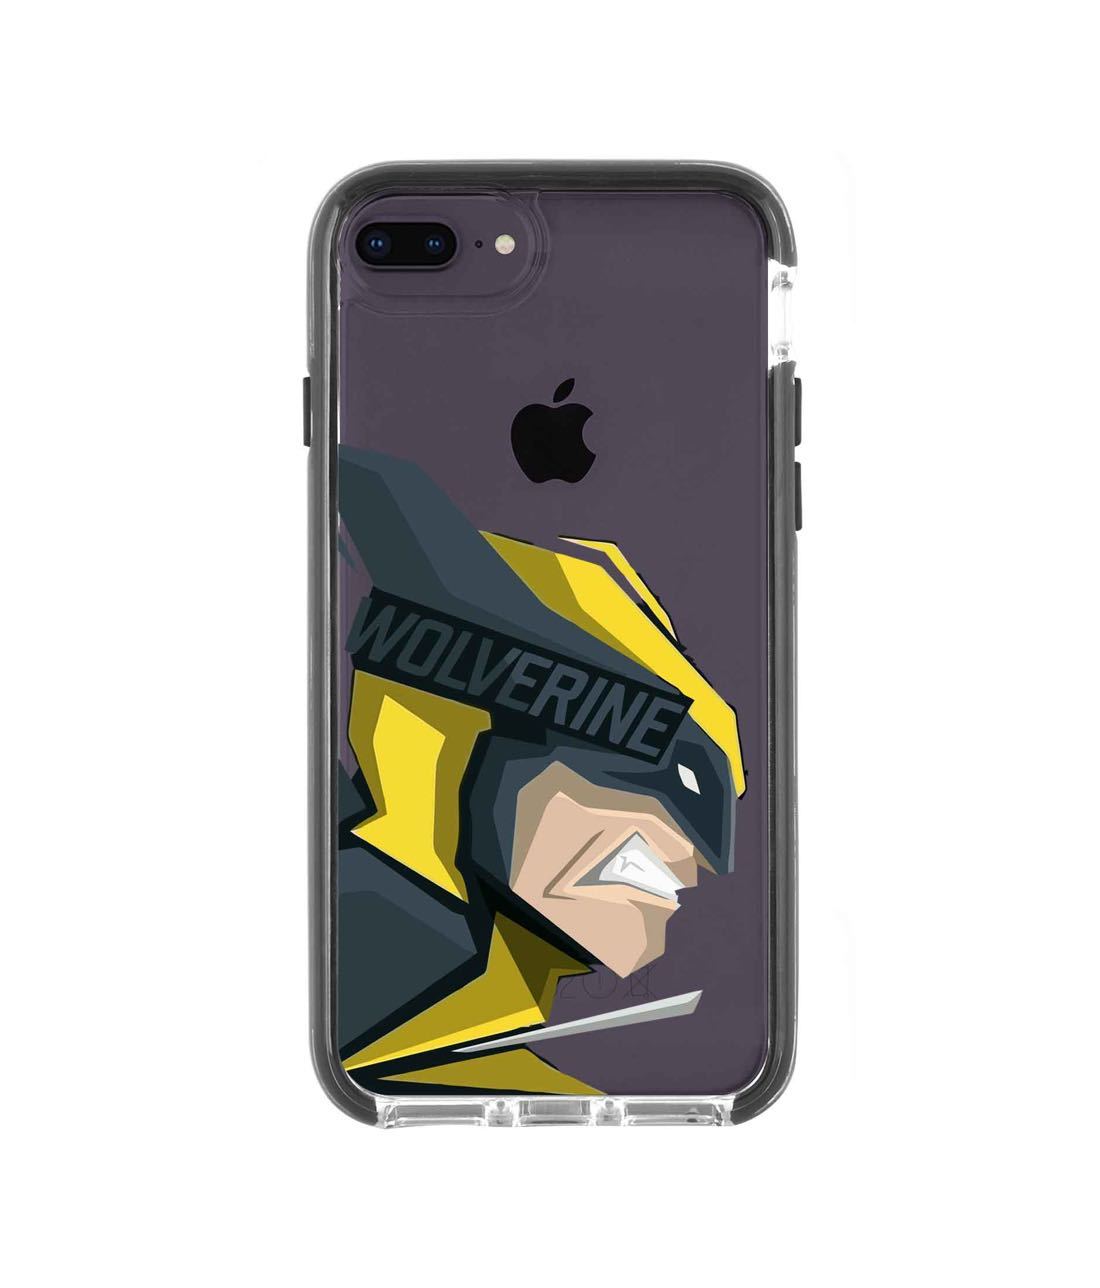 Dont Mess with Wolverine - Extreme Phone Case for iPhone 8 Plus